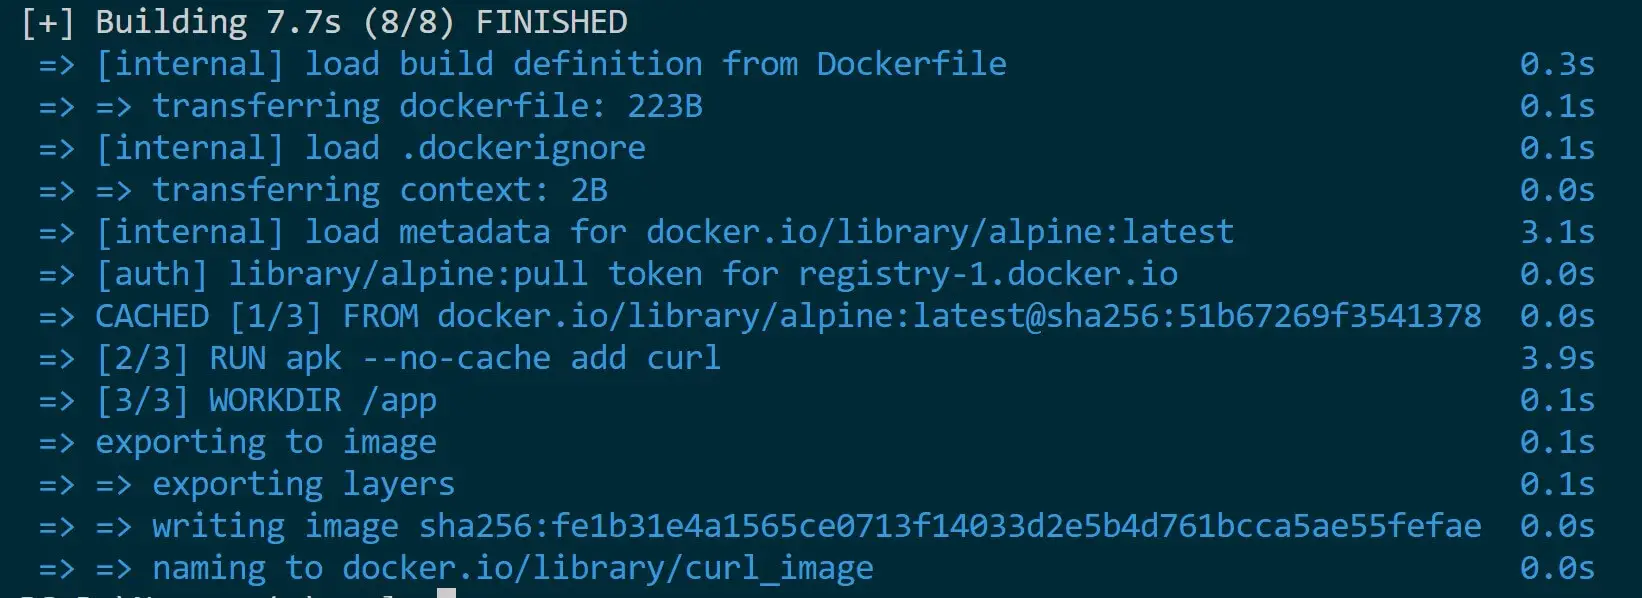 How to Install and Use cURL in Docker Containers